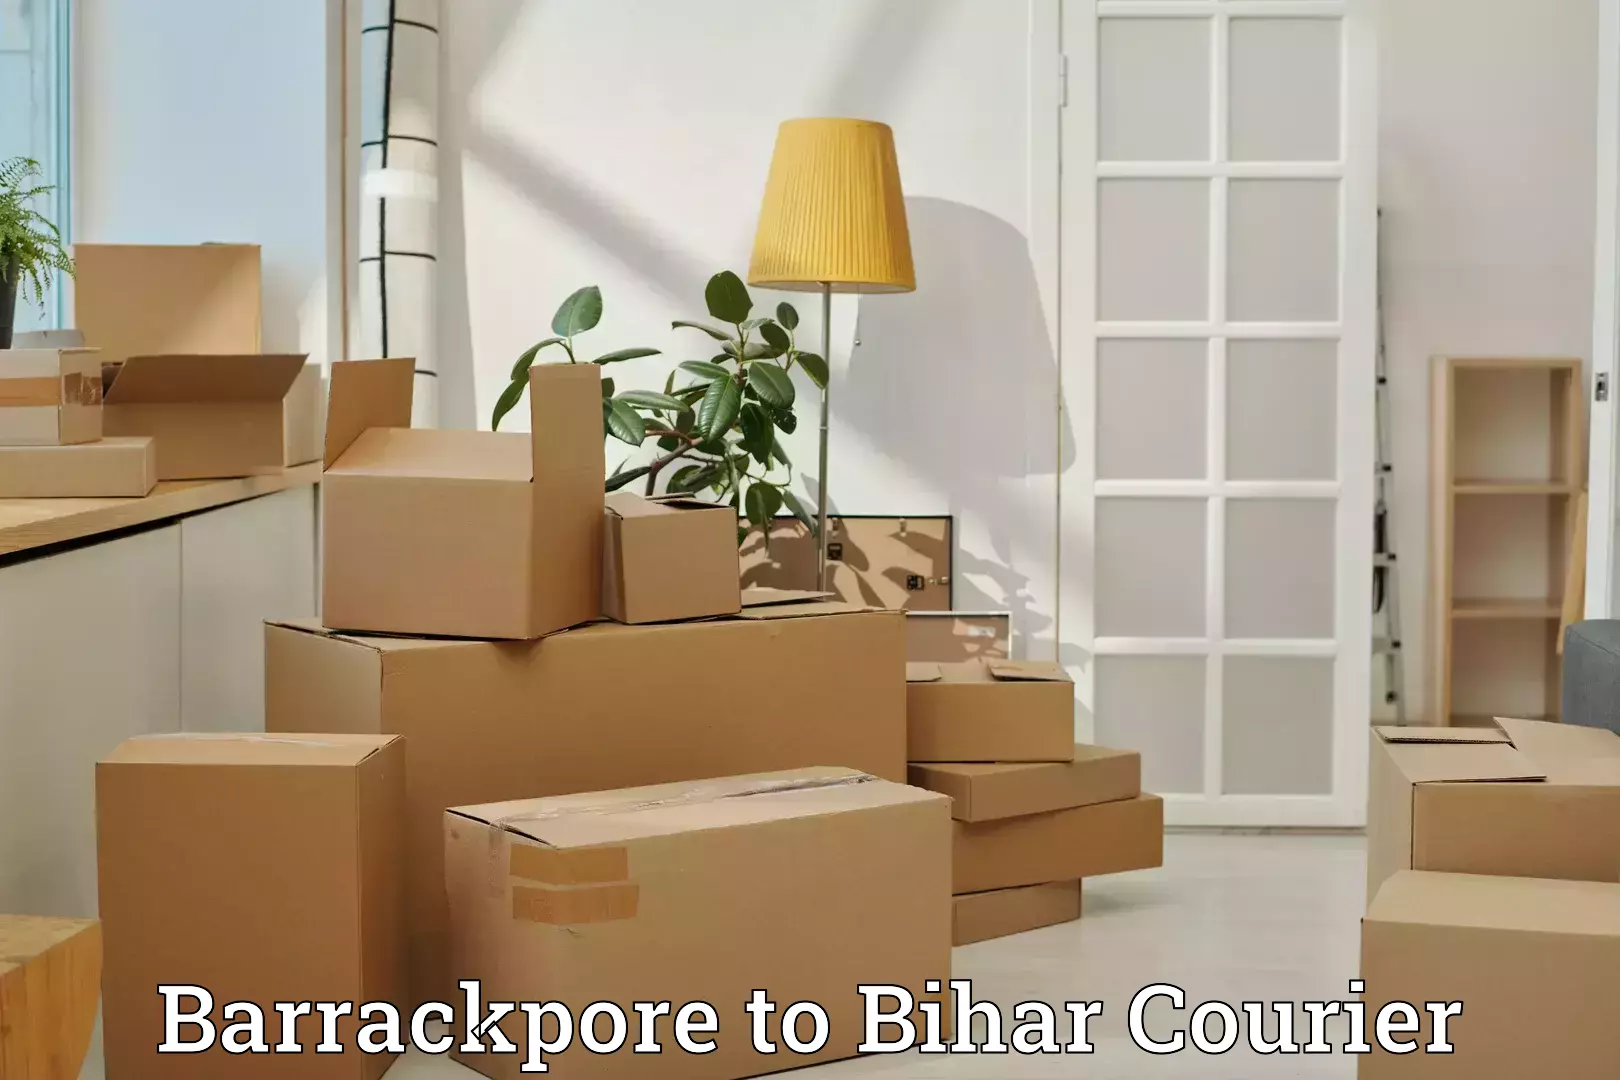 Luggage transport service in Barrackpore to Kuchaikote